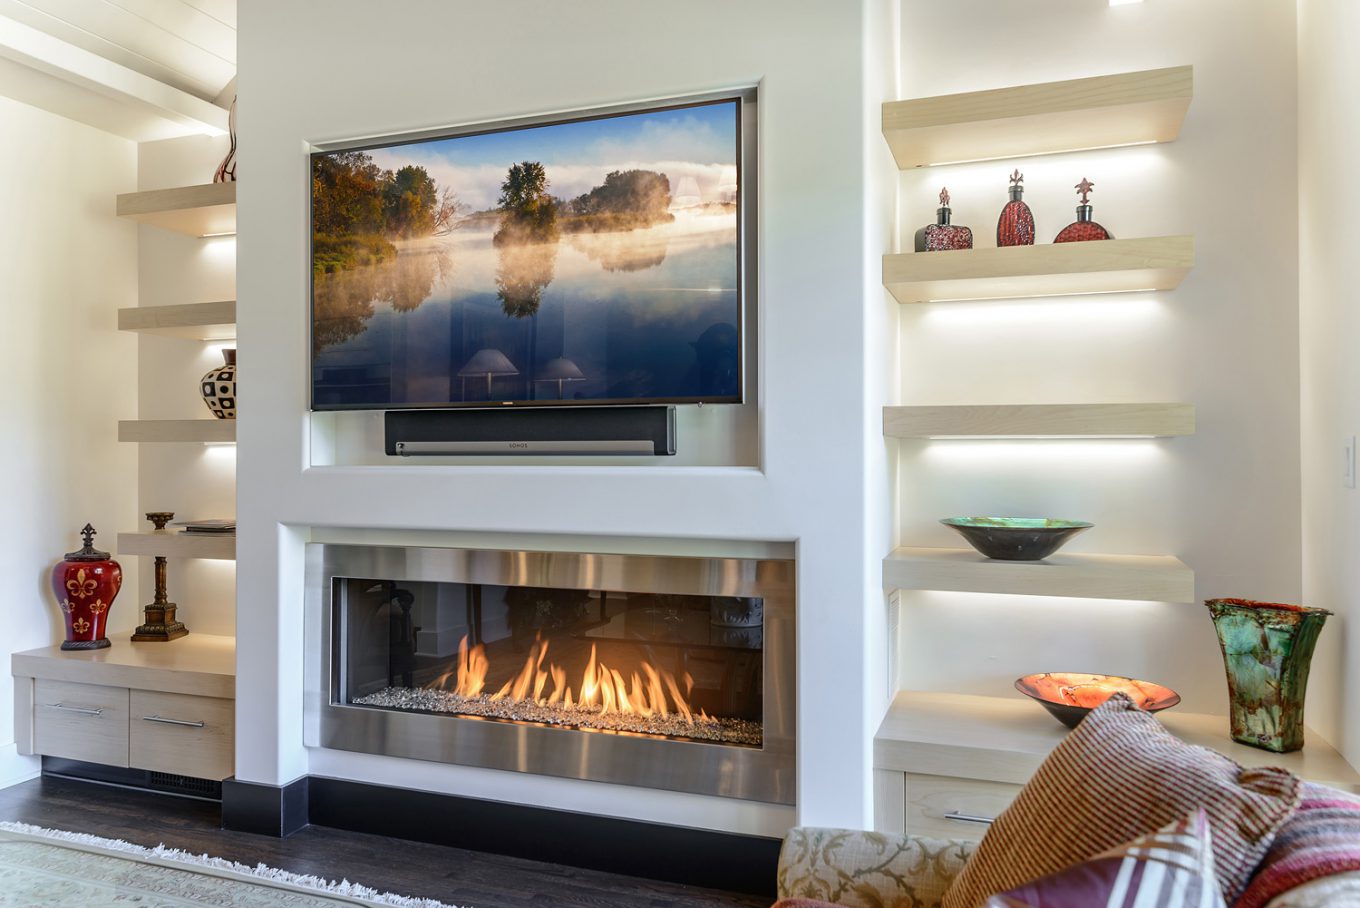 Install A Tv Over Fireplace, How To Install Flat Screen Above Fireplace